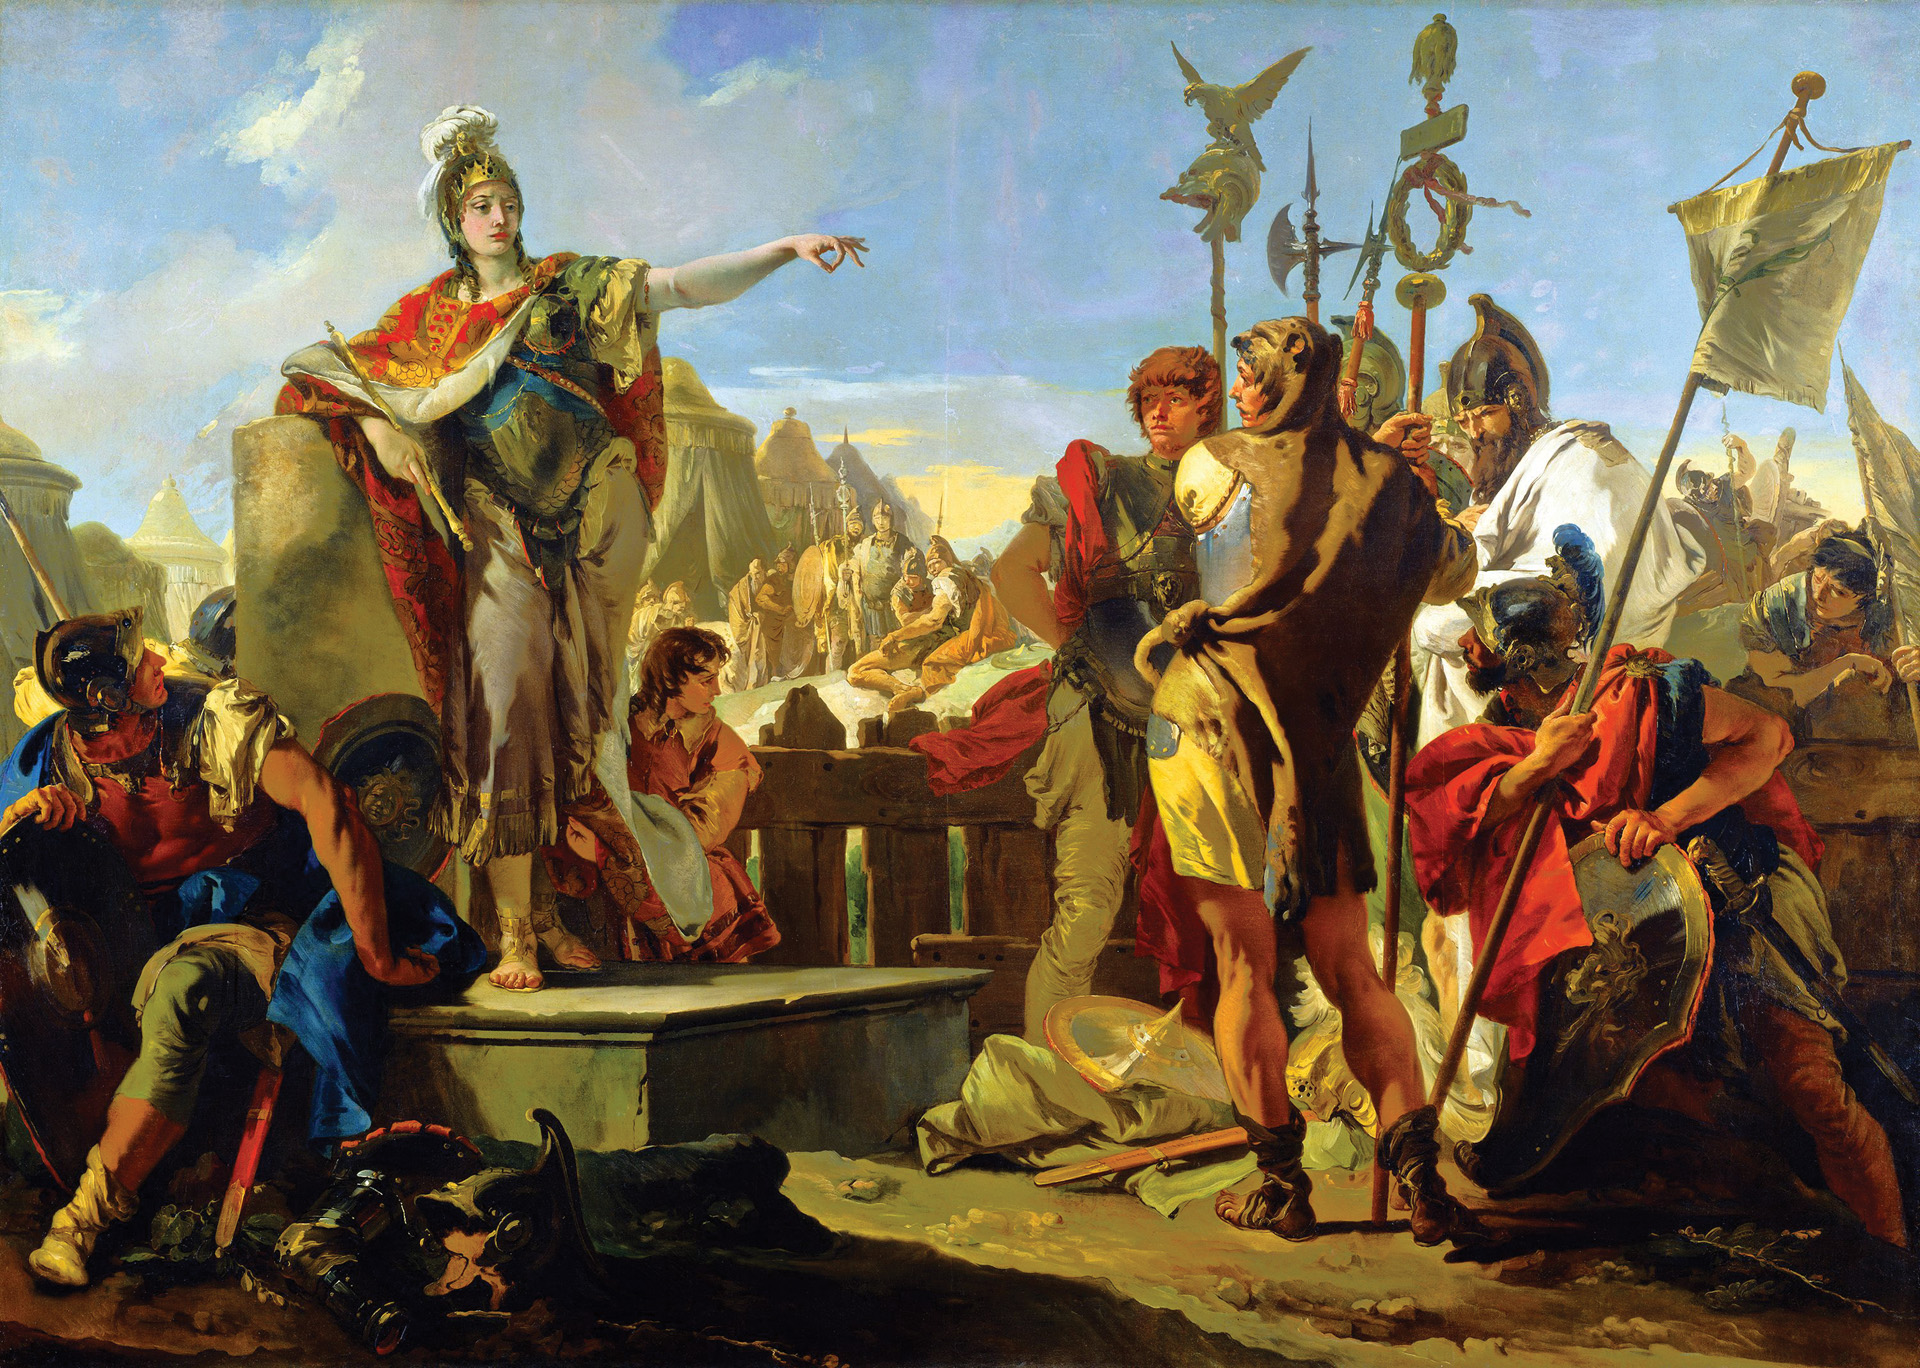 Queen Zenobia, ruler of Palmyra after her husband’s murder in A.D. 267, addresses her soldiers before they go into battle against the Roman army in this painting by Giovanni Tiepolo. Some historical accounts suggest Zenobia had previously travelled with her husband during his military campaigns.